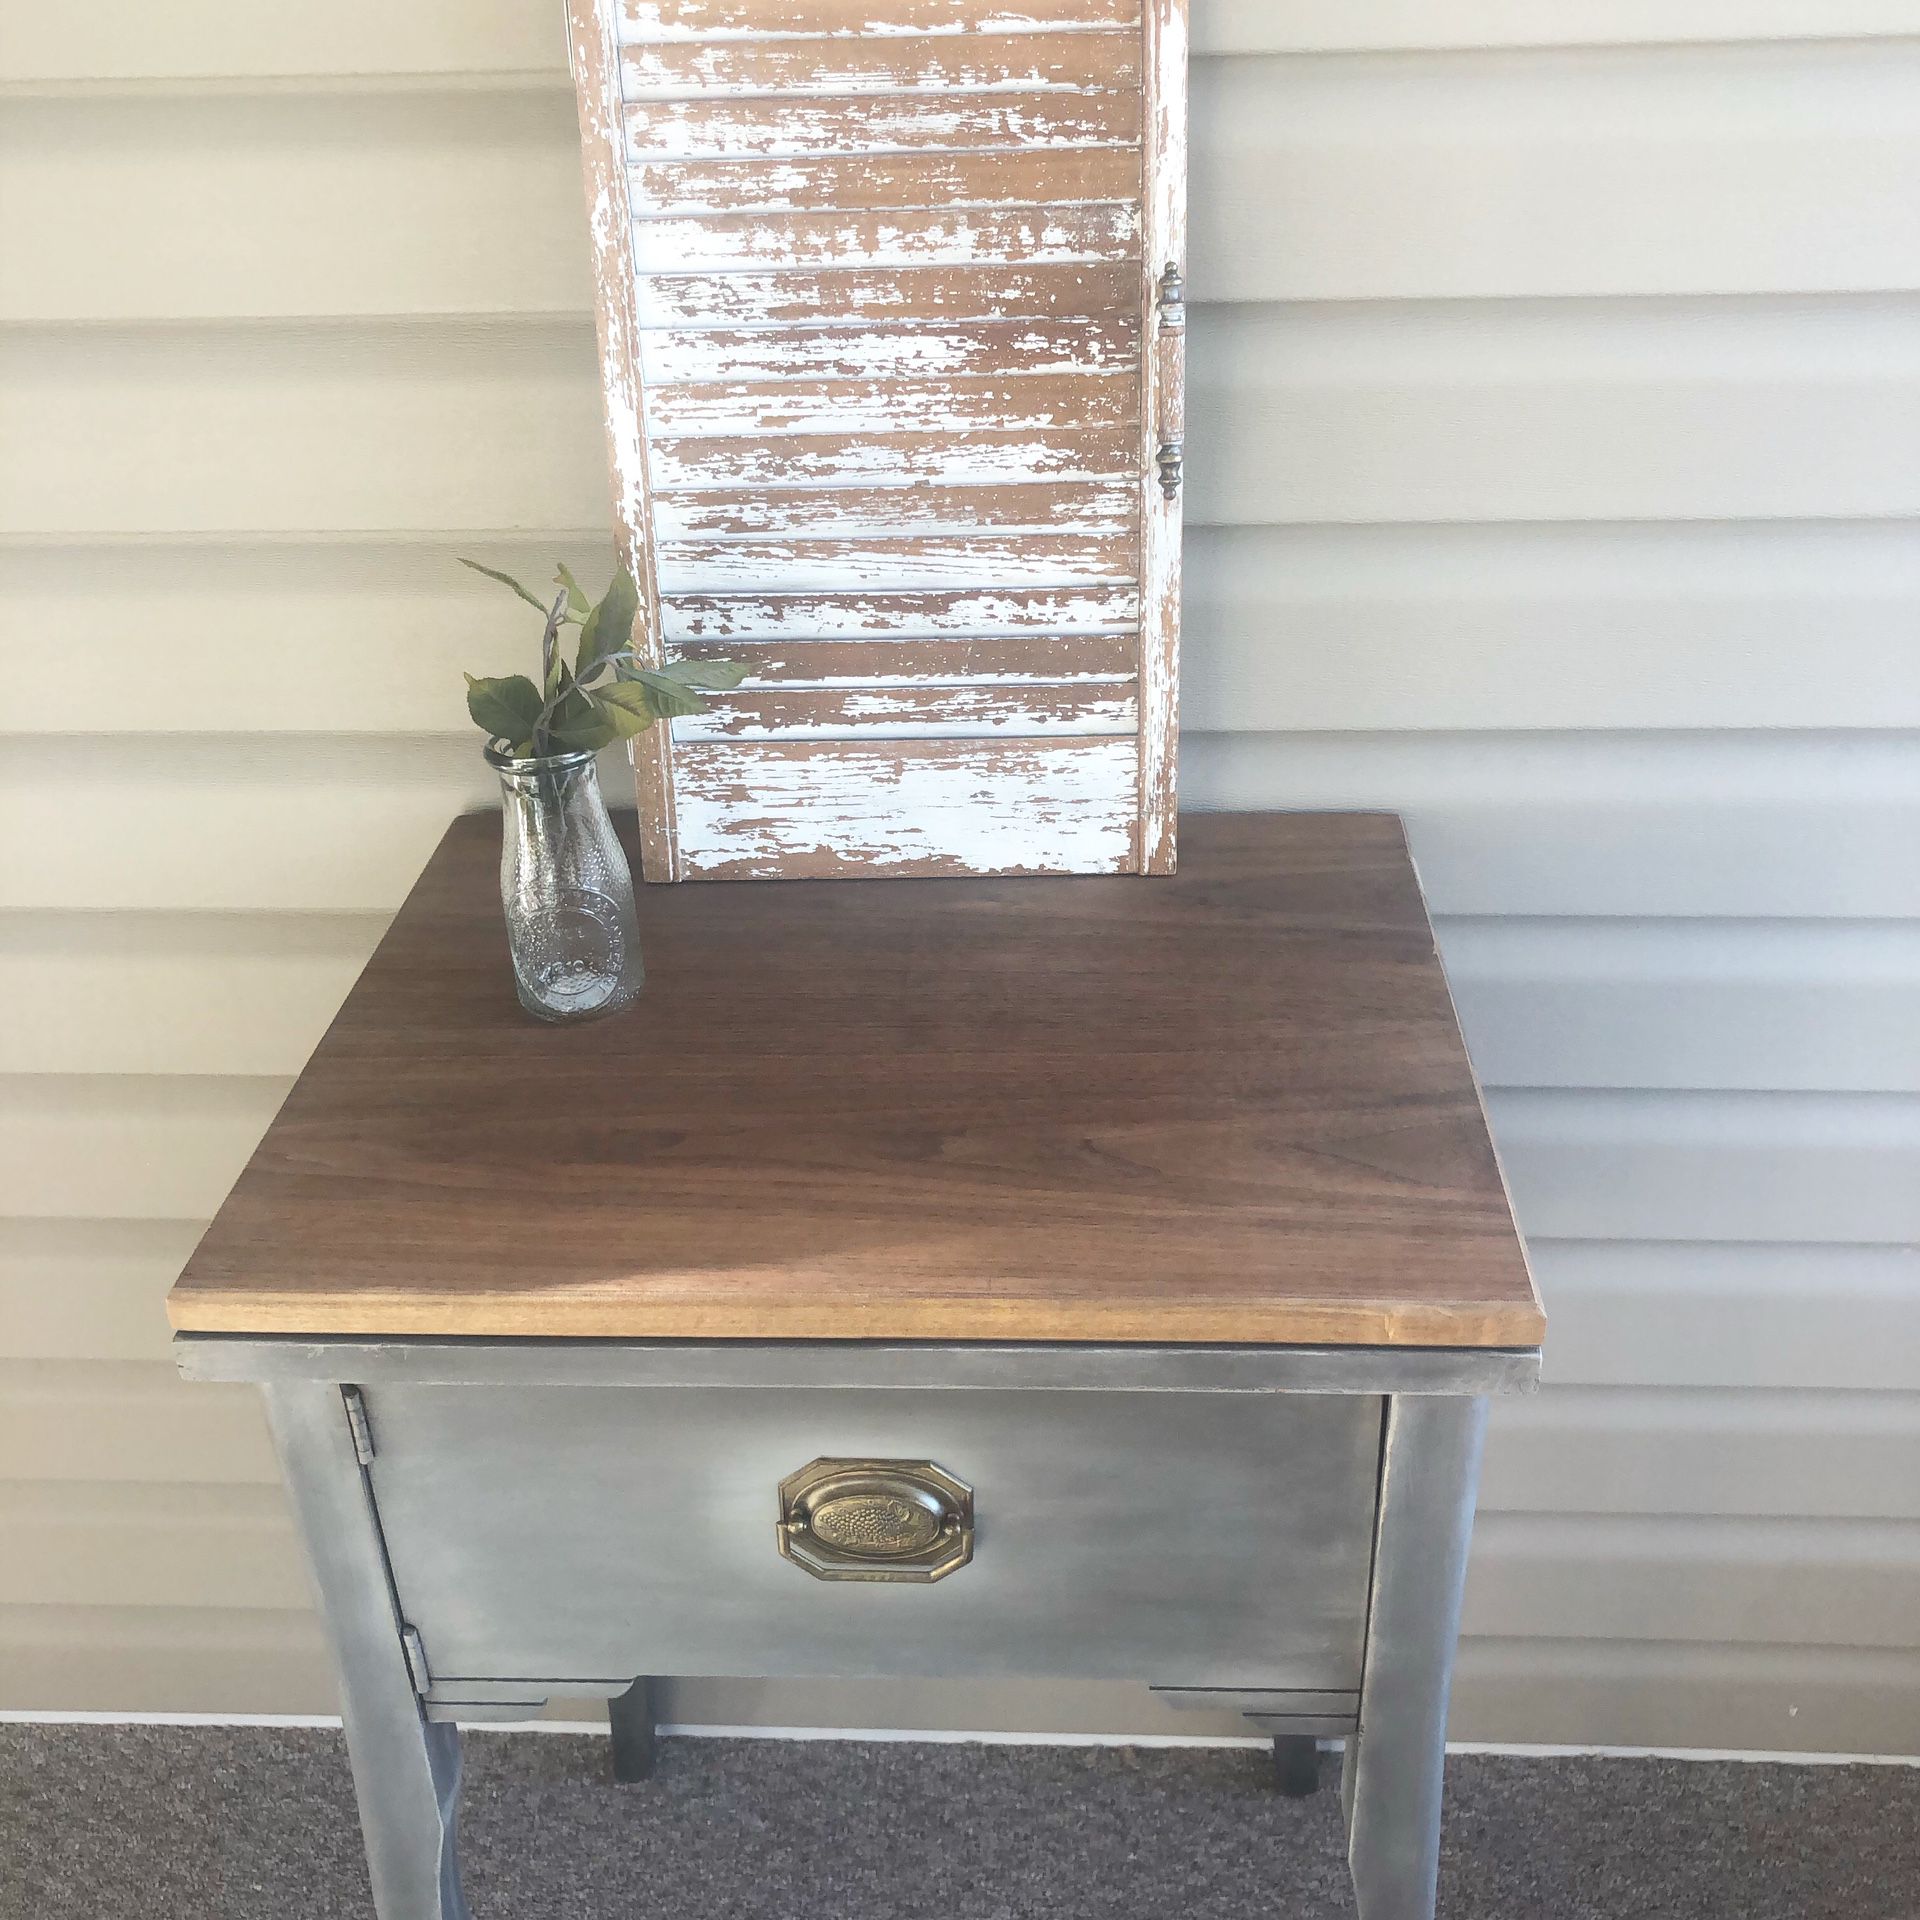 Adorable refinished ANTIQUE sewing machine stand